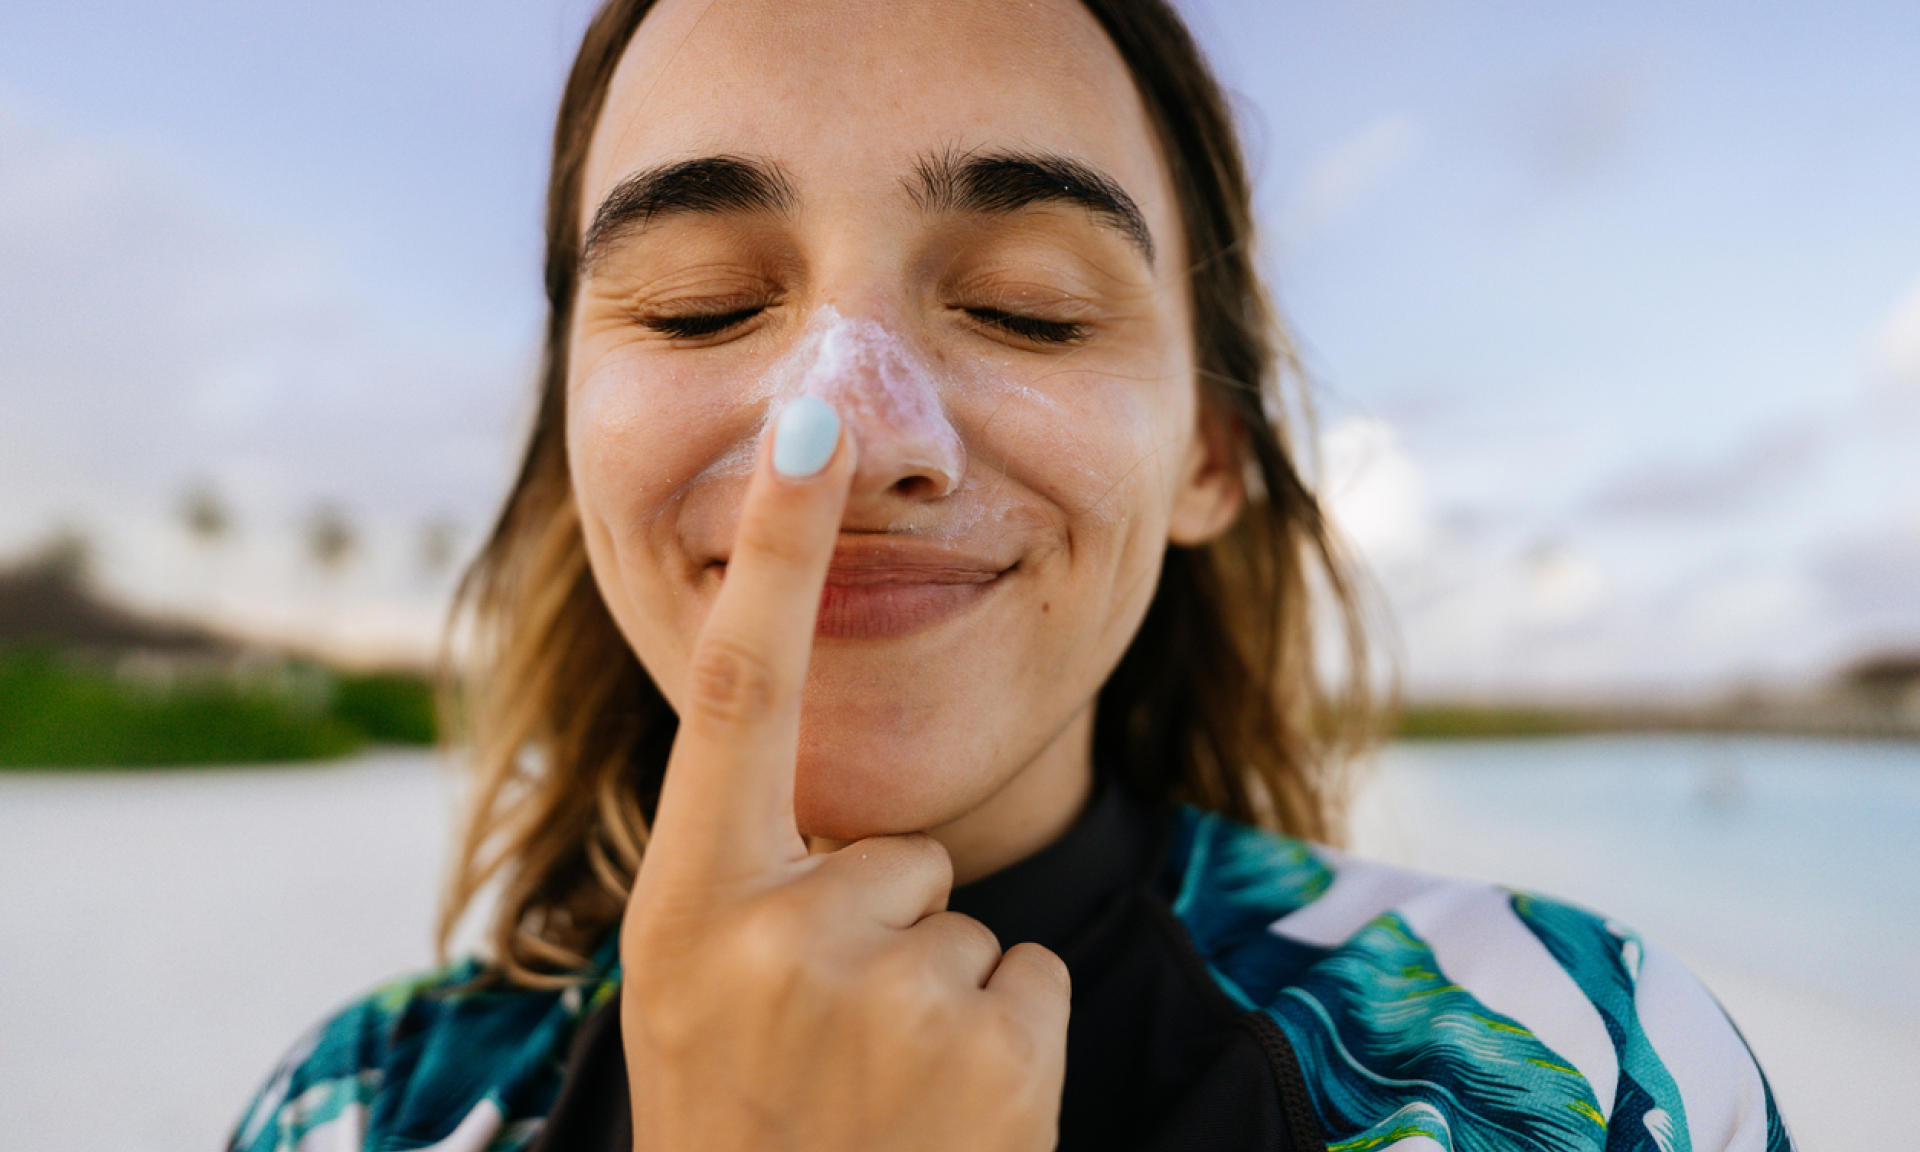 Woman applying sunscreen on her nose